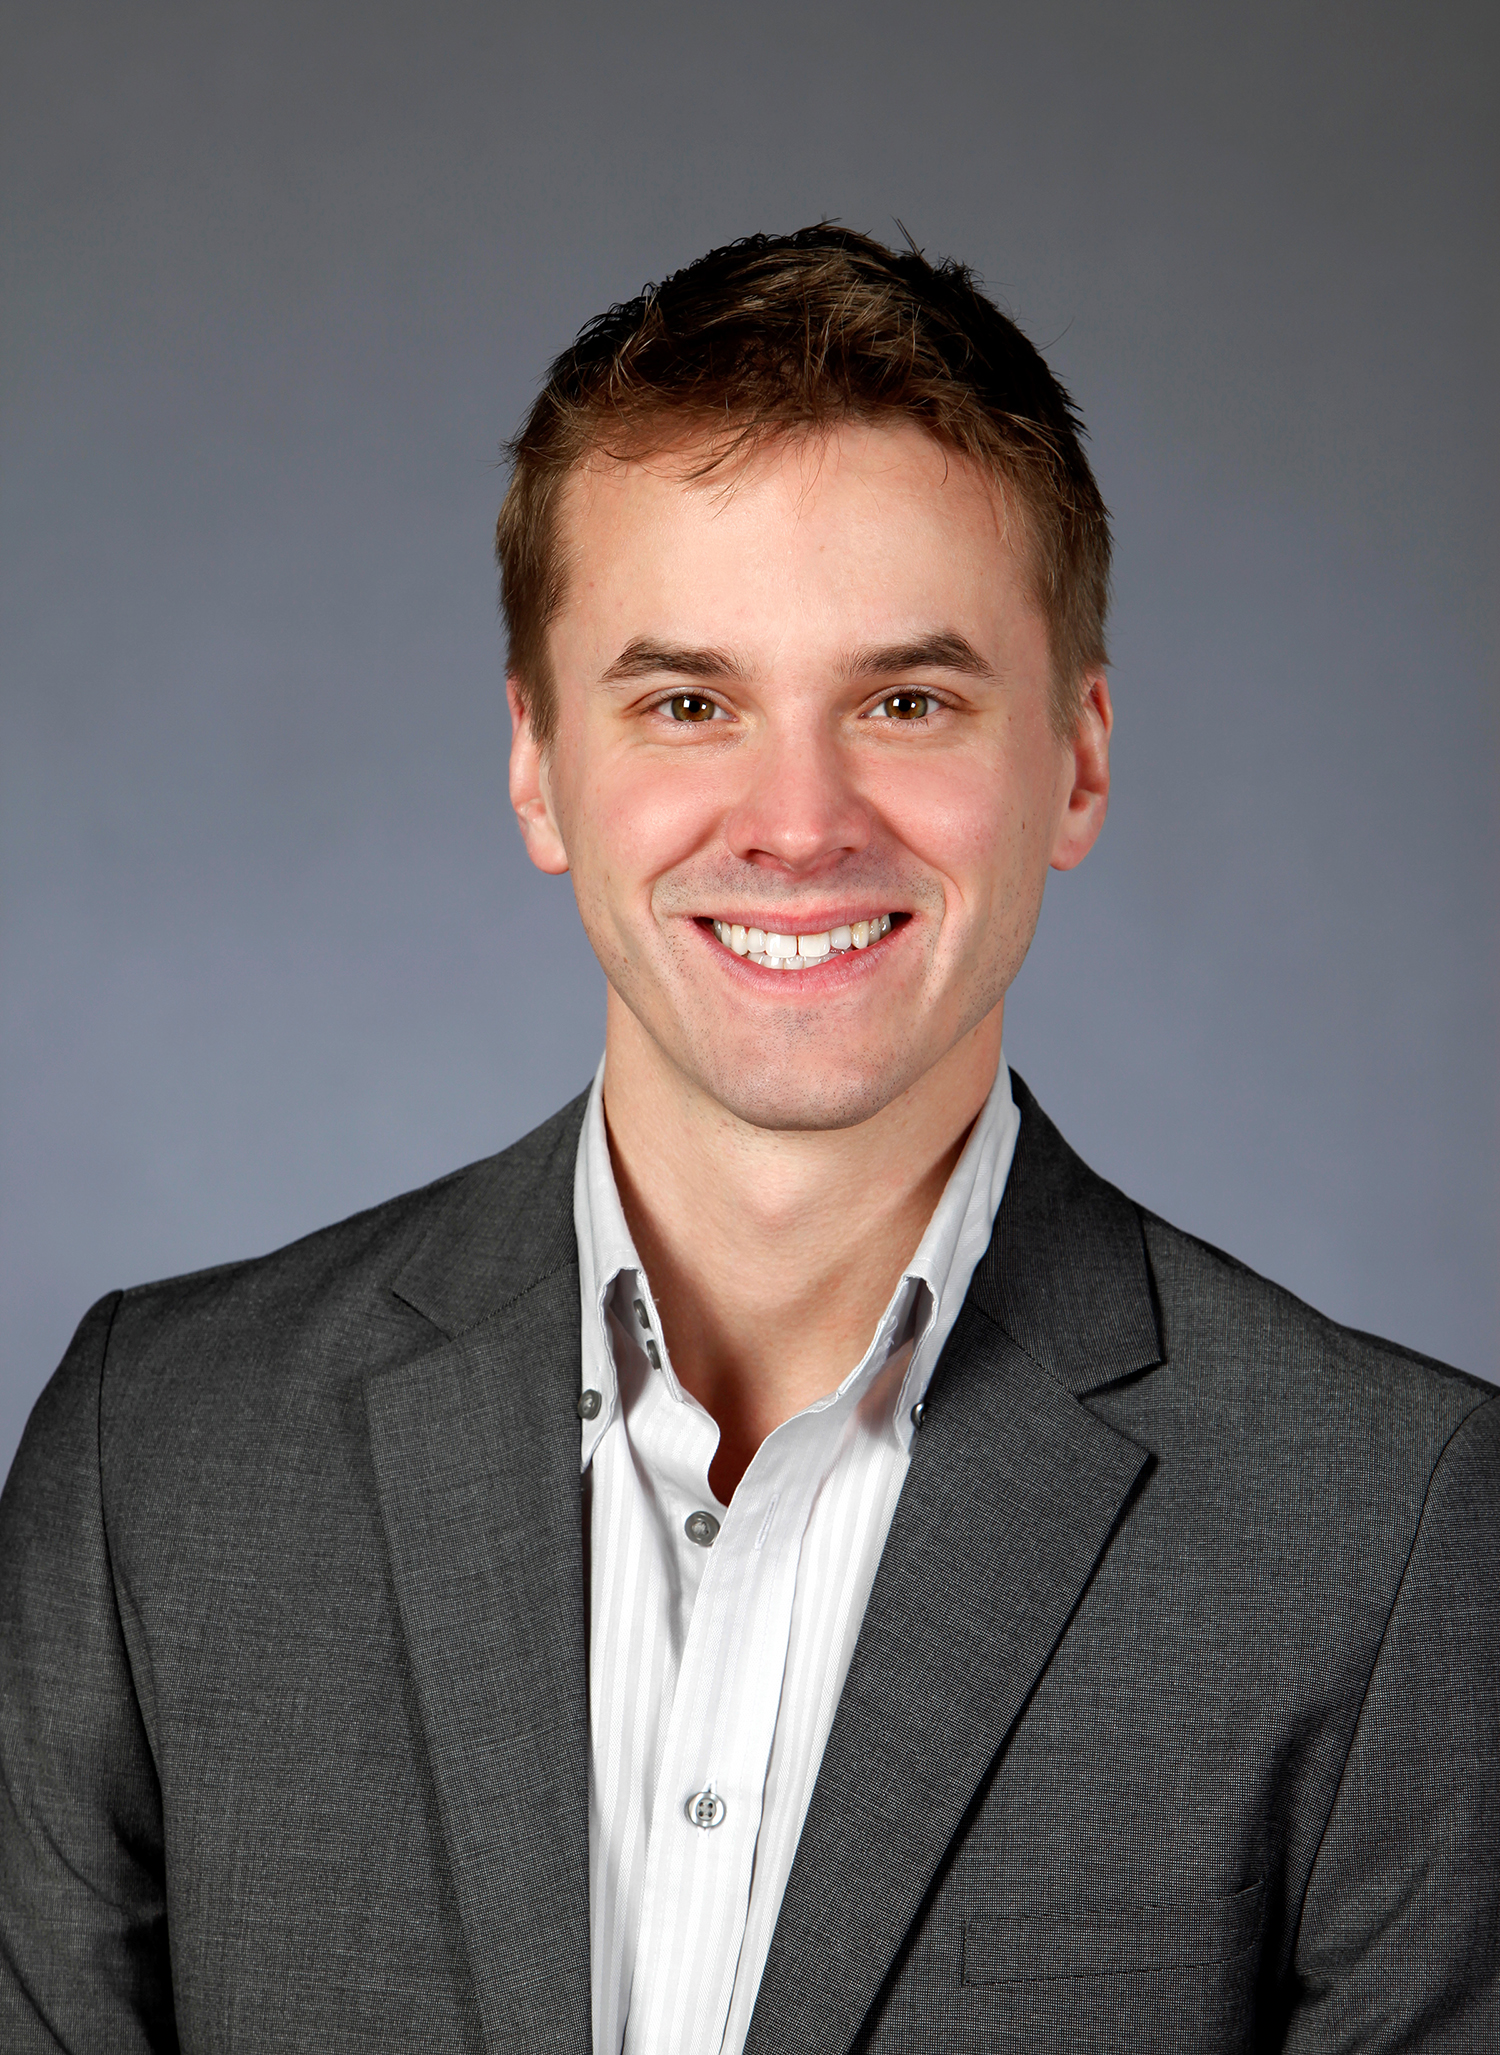 Generation Brands has hired Will Ambroson as Its New National Merchandising Manager